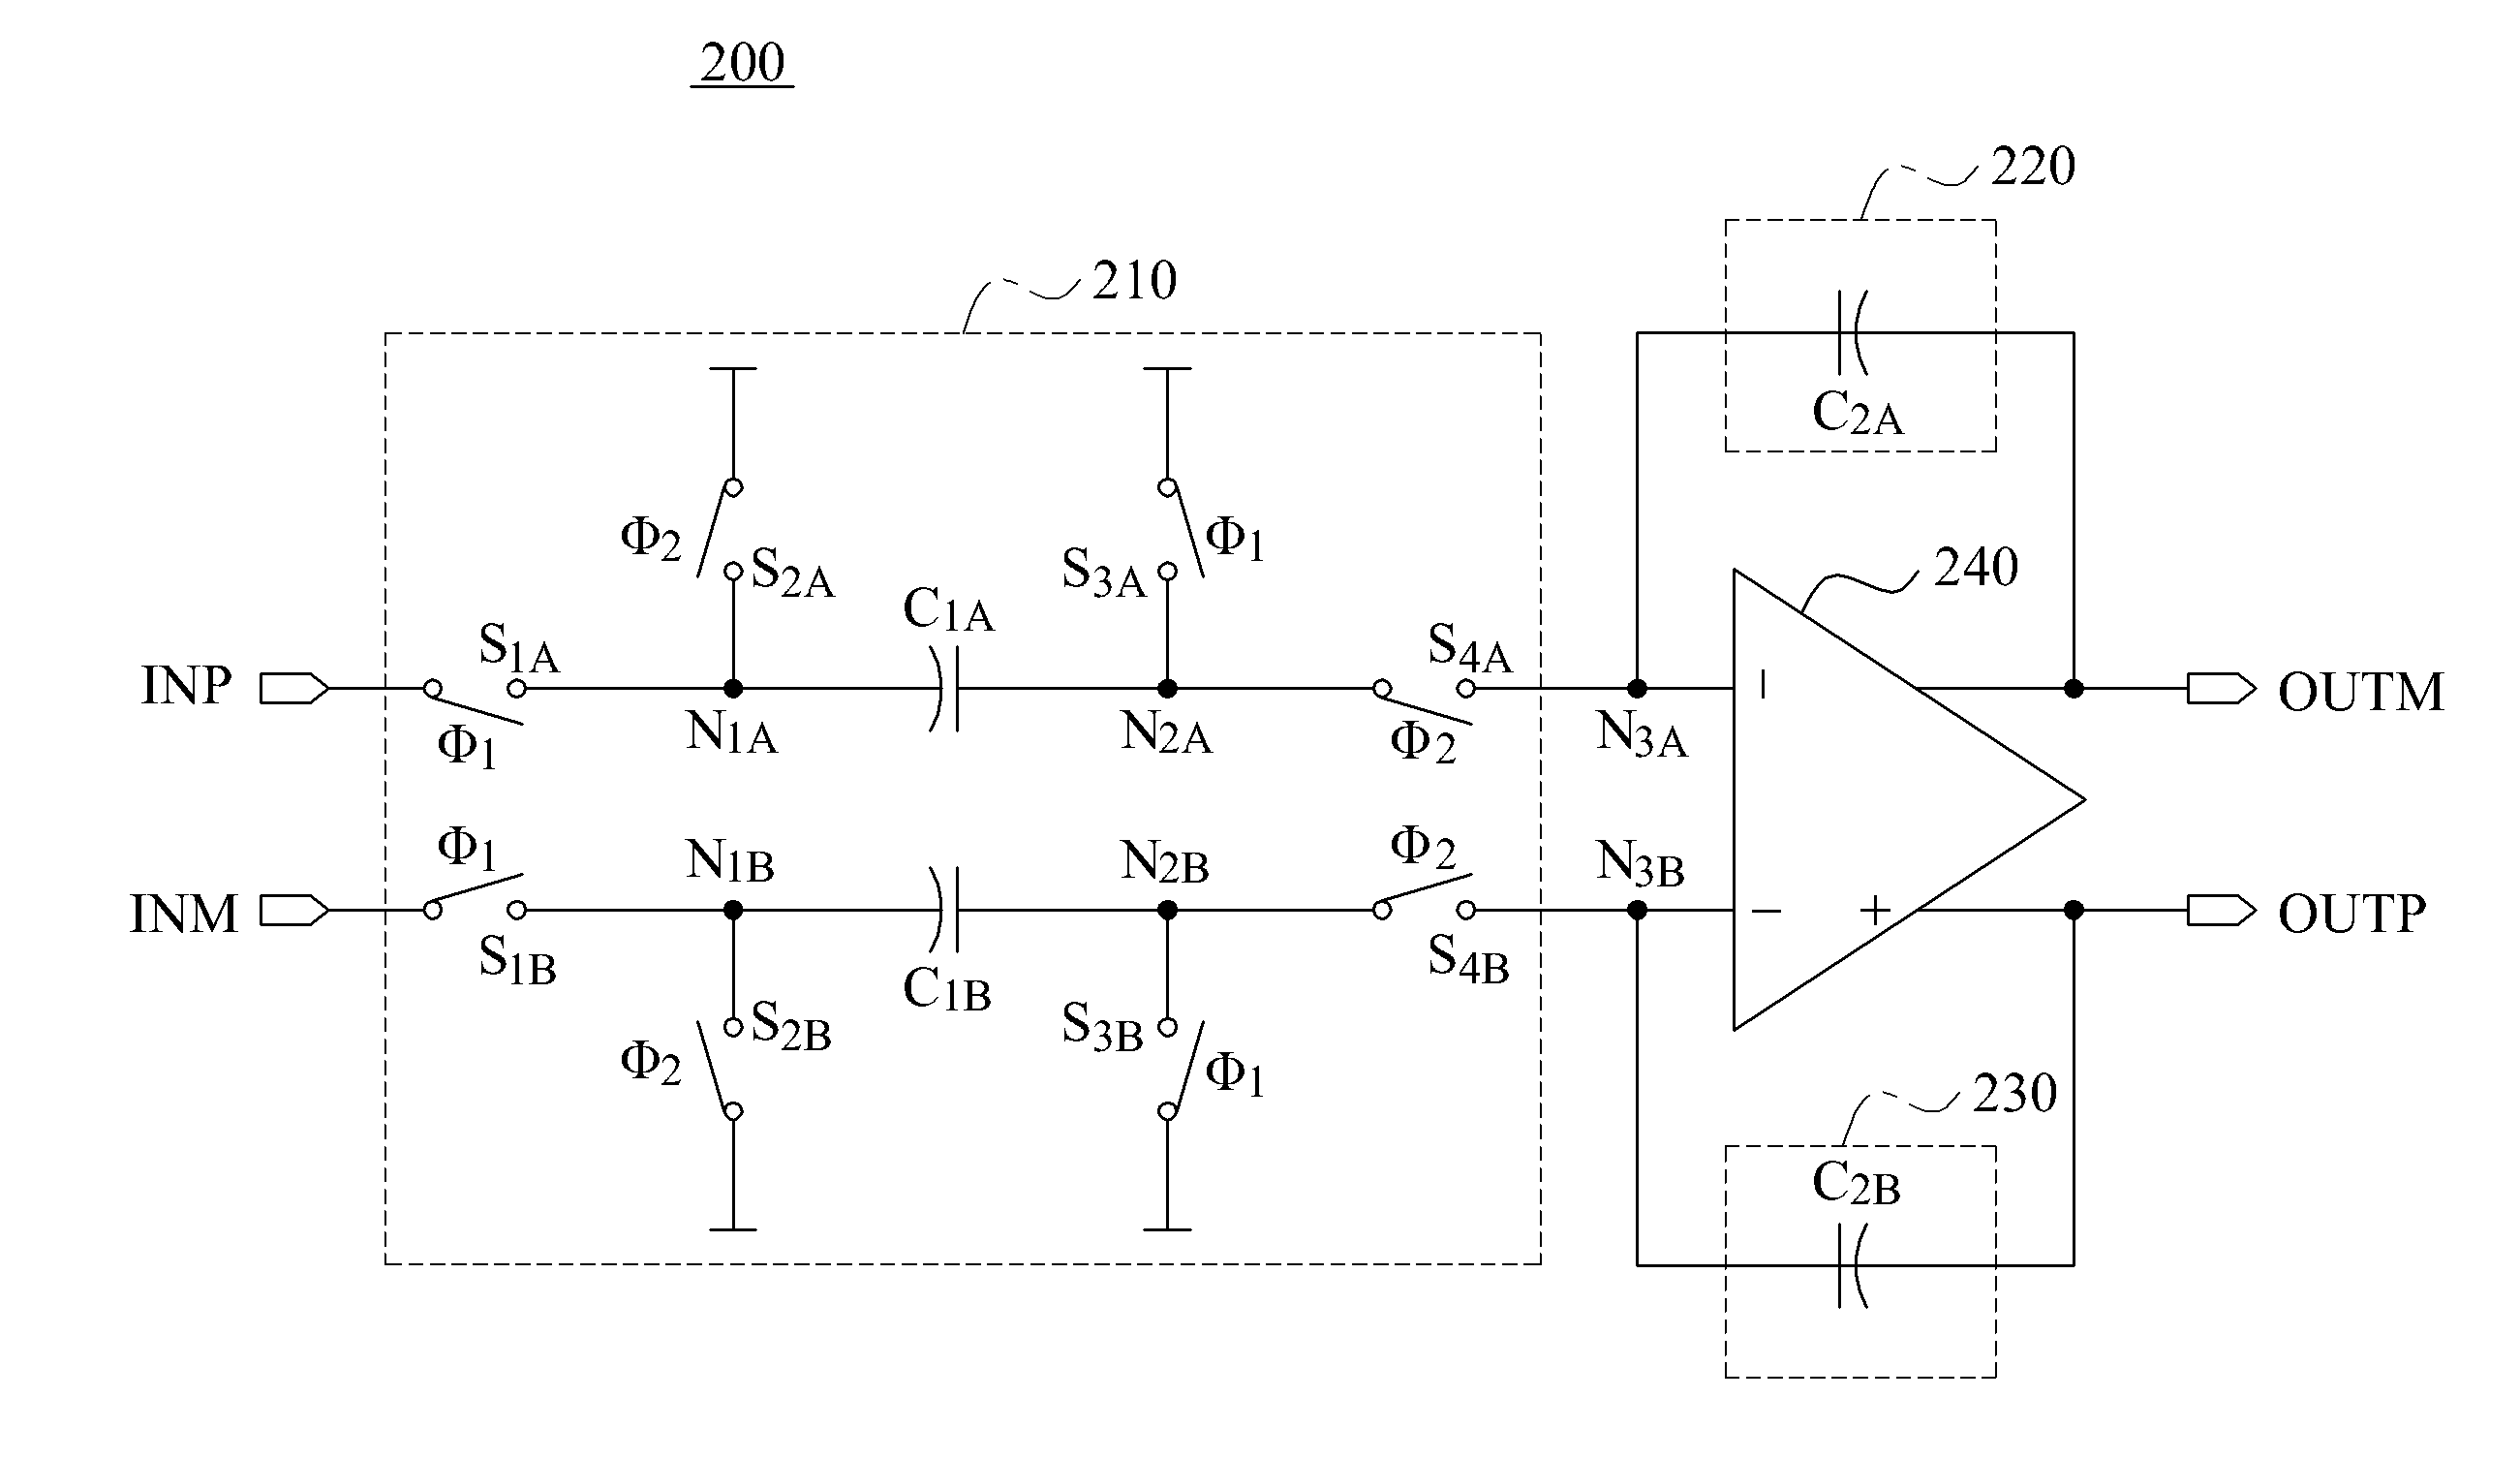 Switched capacitor circuit